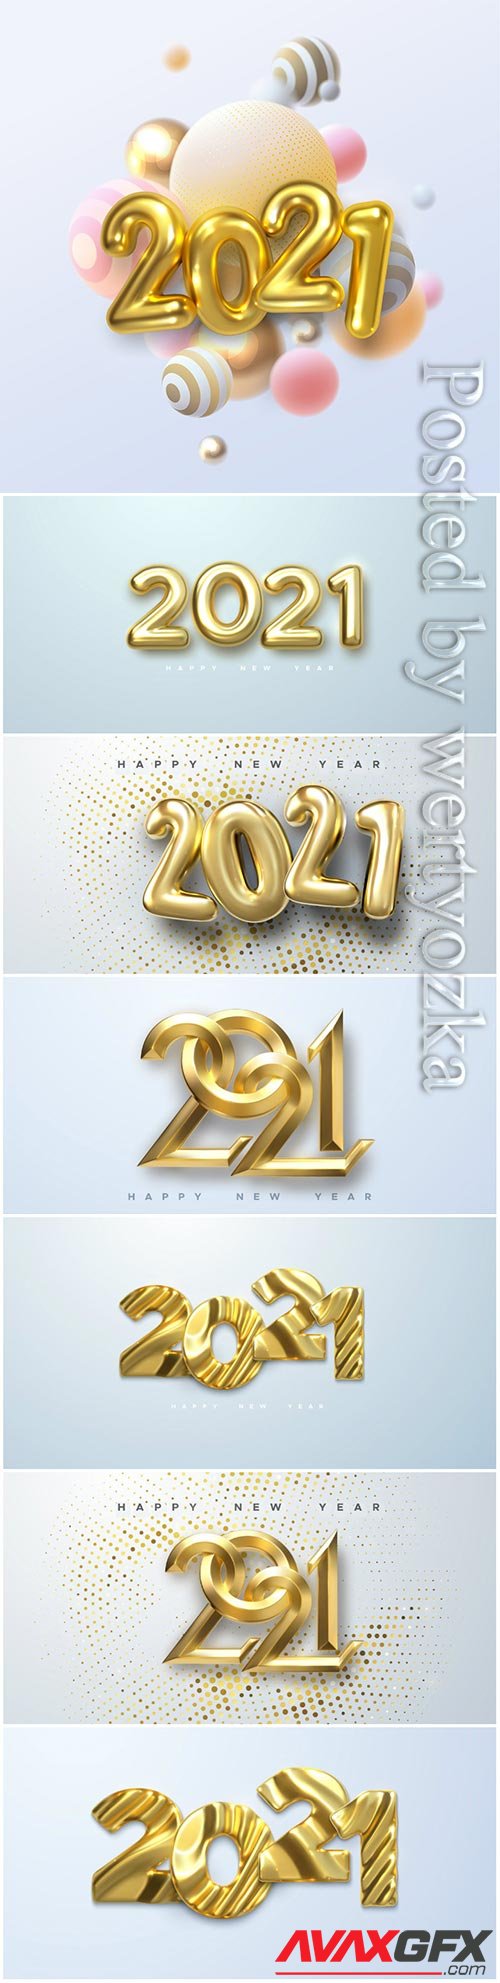 Gold numbers 2021 for new year illustration